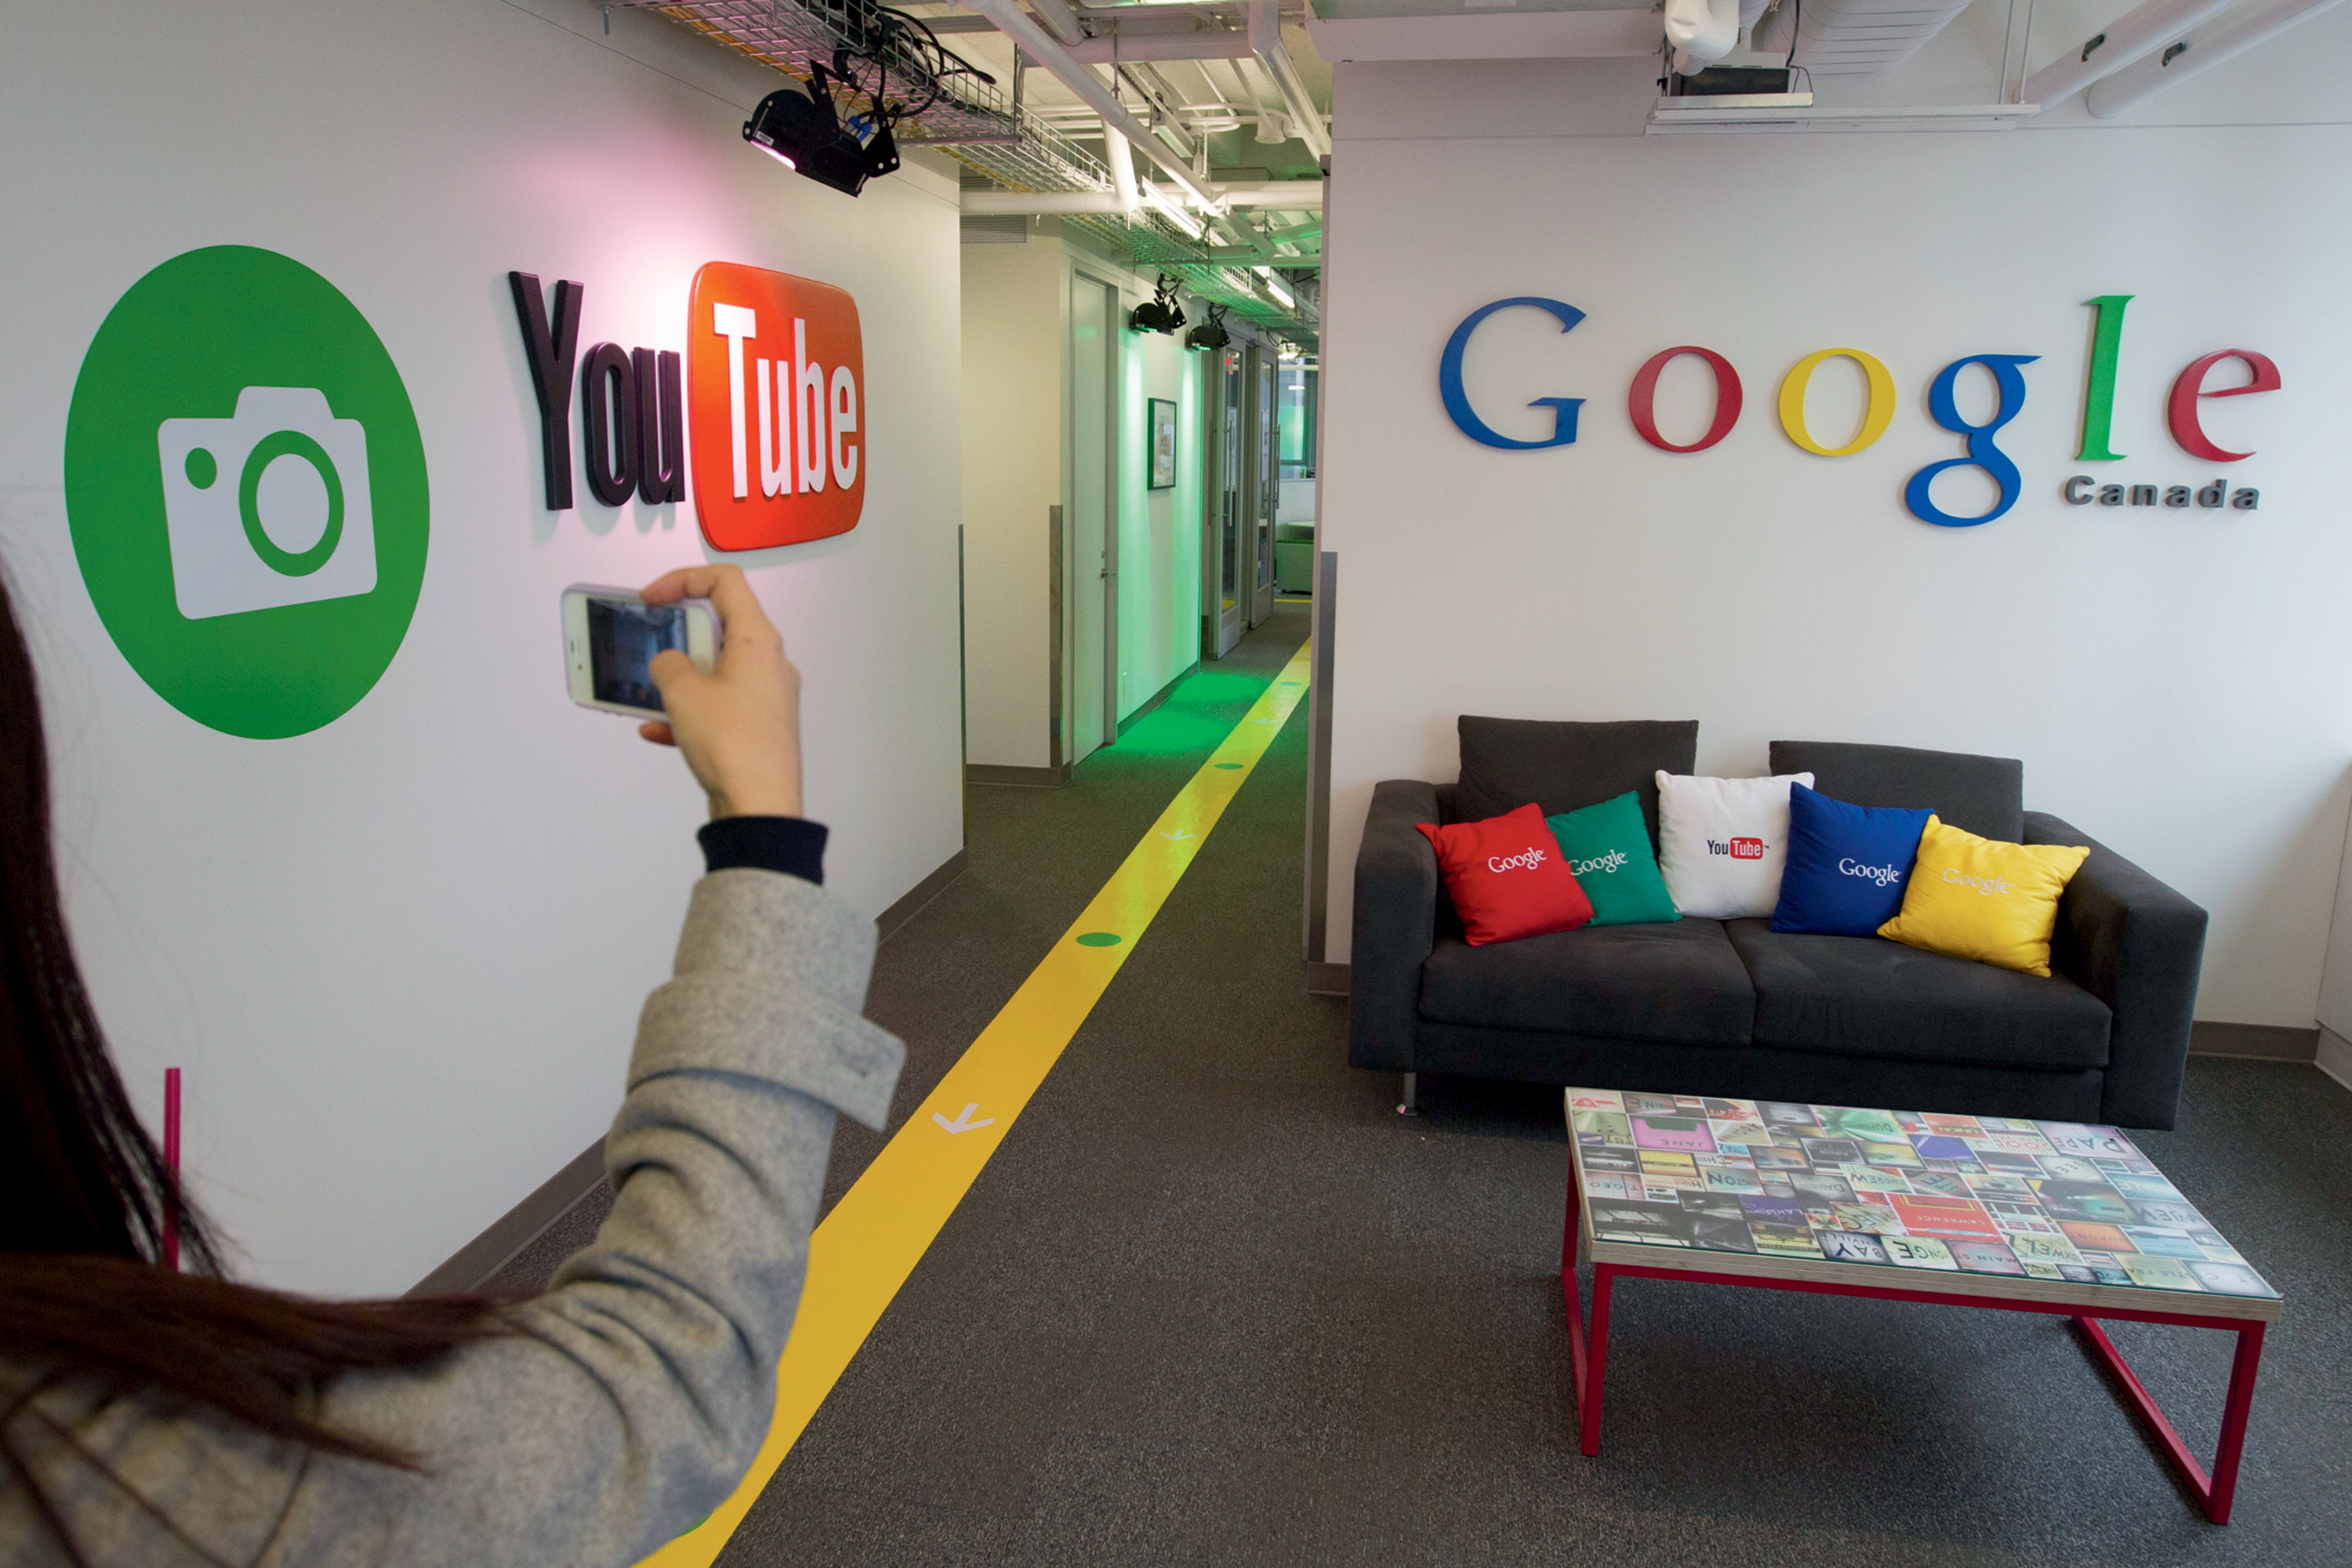 CONCENTRATION - Google in Toronto: Top tech has settled in the city -